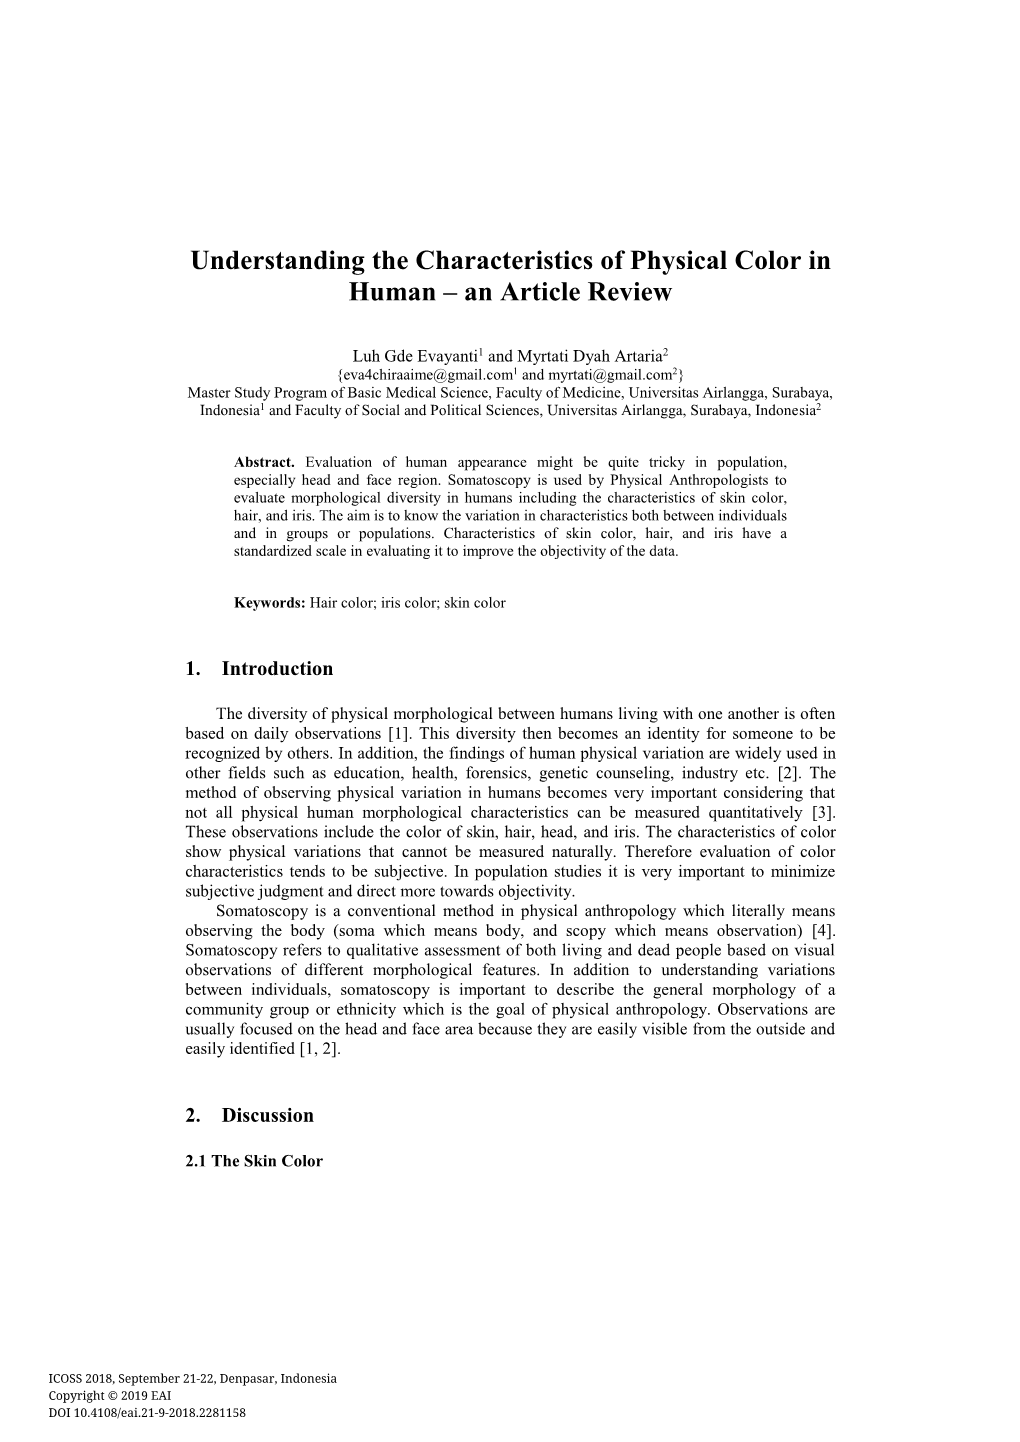 Understanding the Characteristics of Physical Color in Human – an Article Review